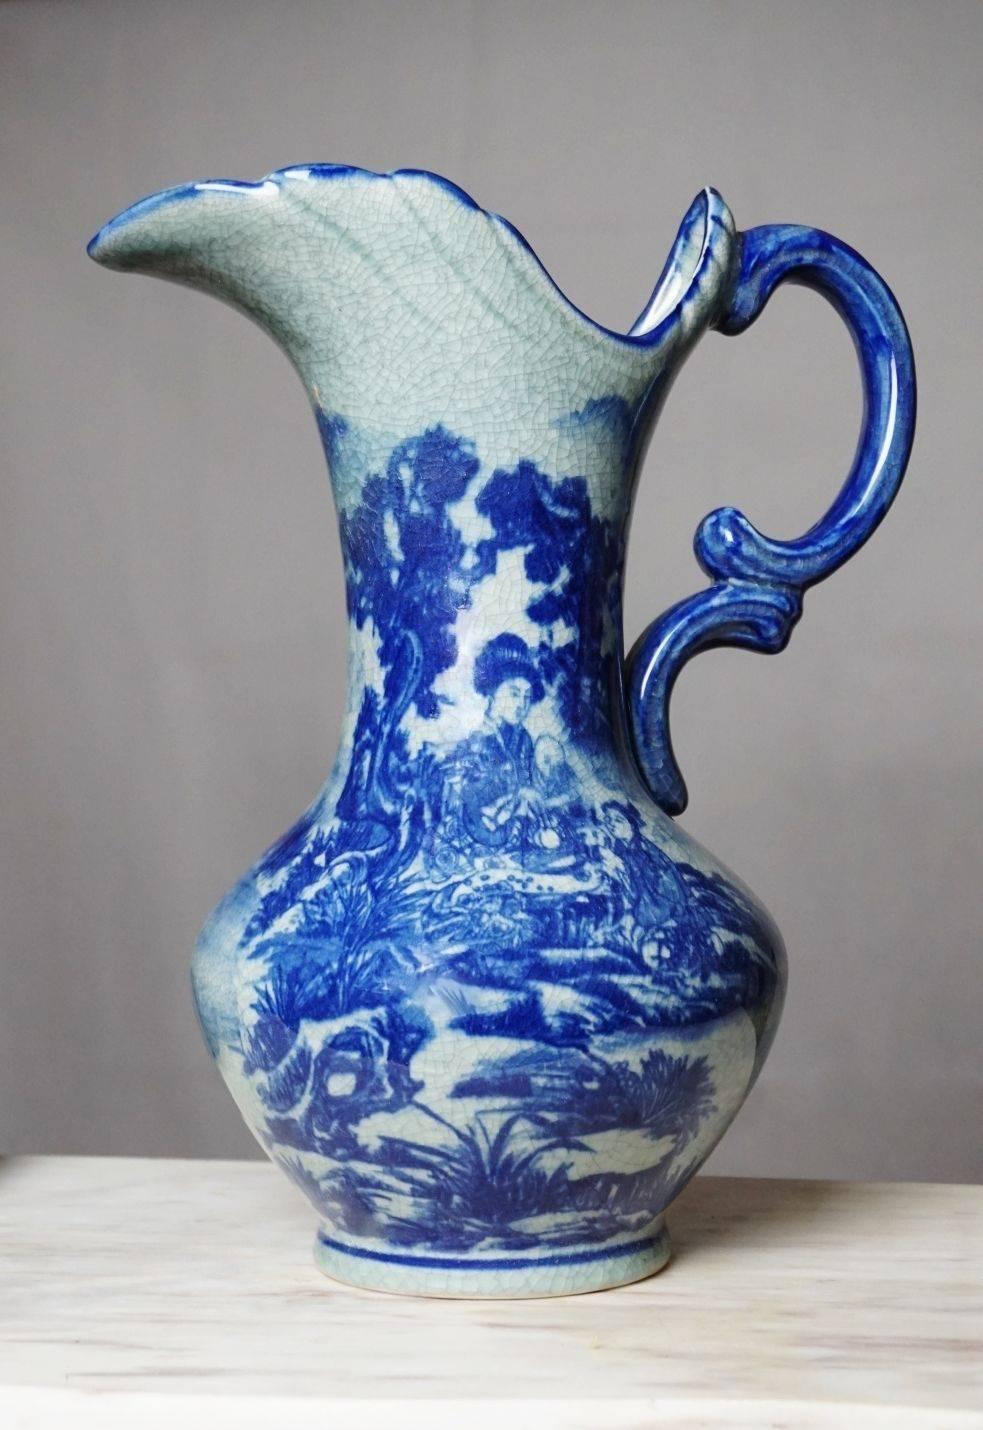 Large Japonism blue and white crackle glazed hand painted ceramic handle vase or jug with under plate.

Measures:
Jug
Height 13.50 in (35 cm)
Width with handle 11 in (28 cm) 

Plate: Diameter 11.75 in (30 cm).

 